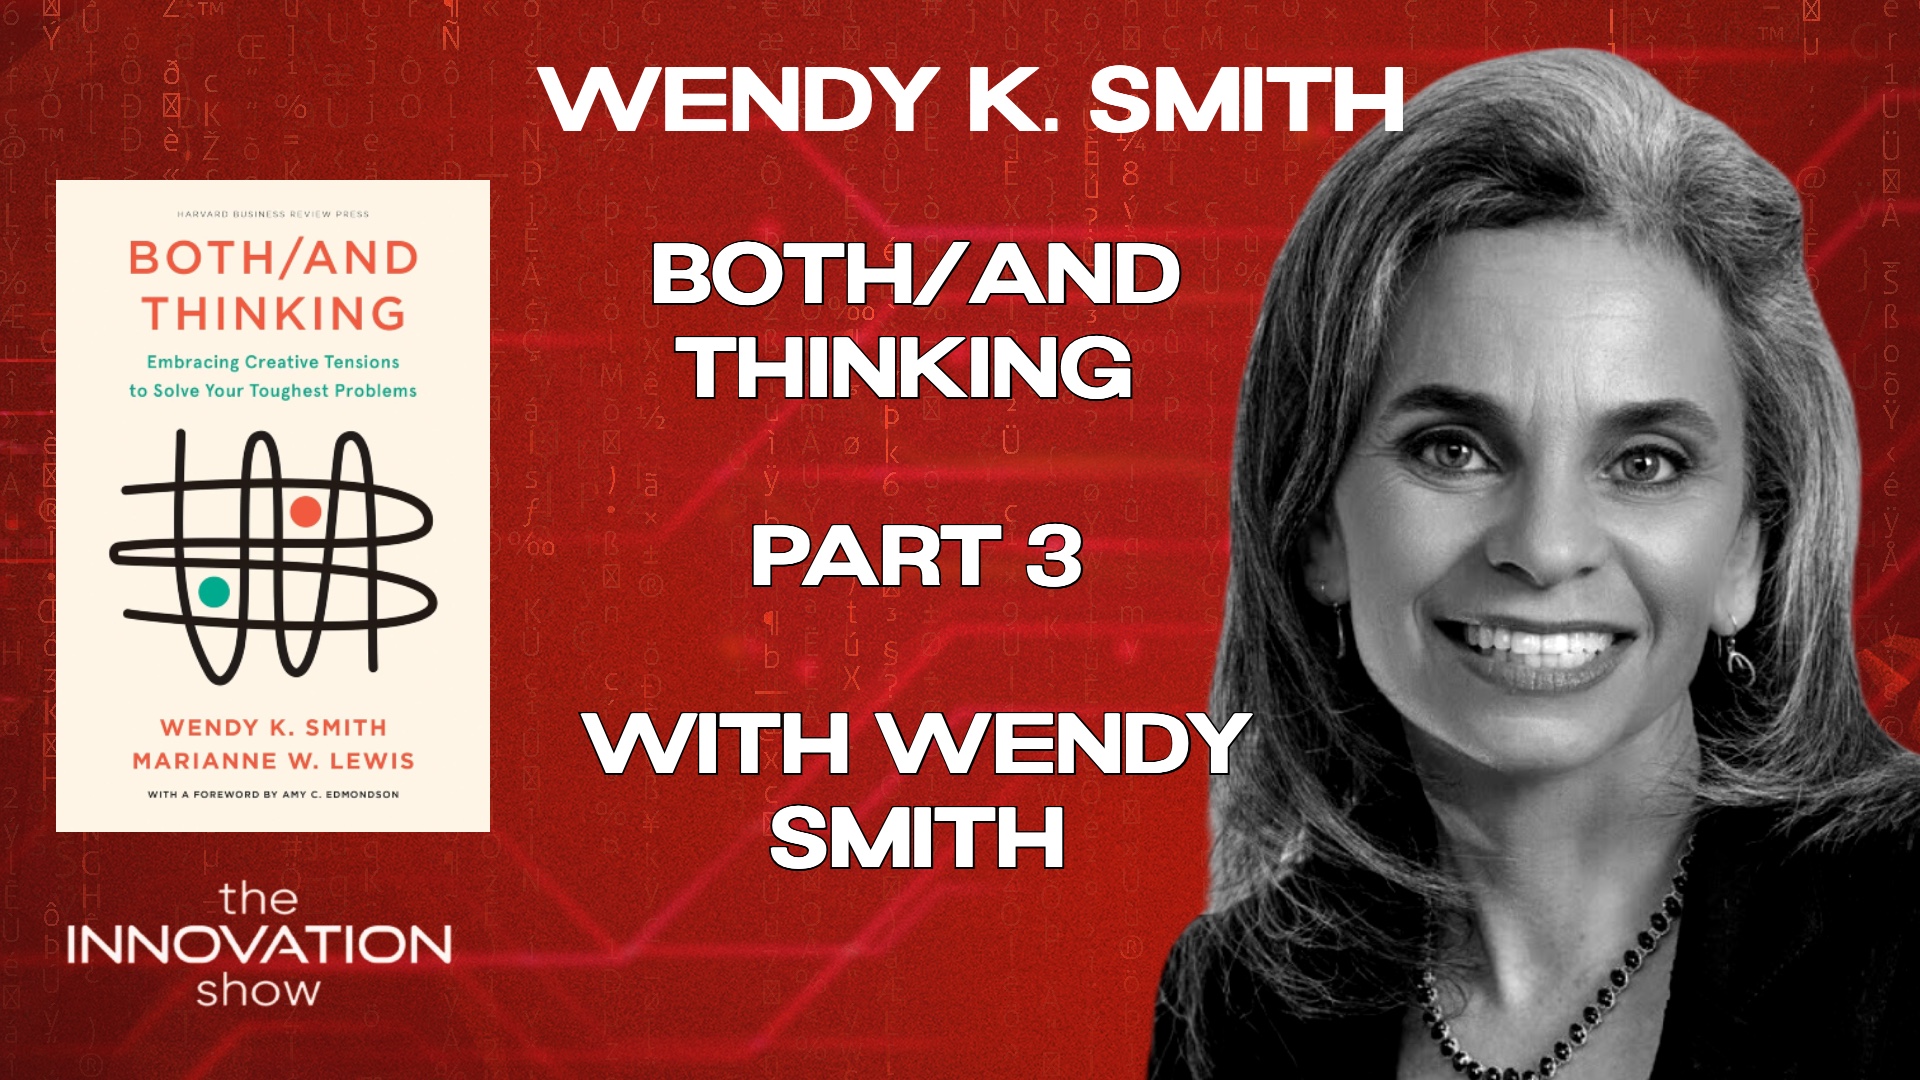 Both_And Thinking Part 3 With Wendy Smith-3